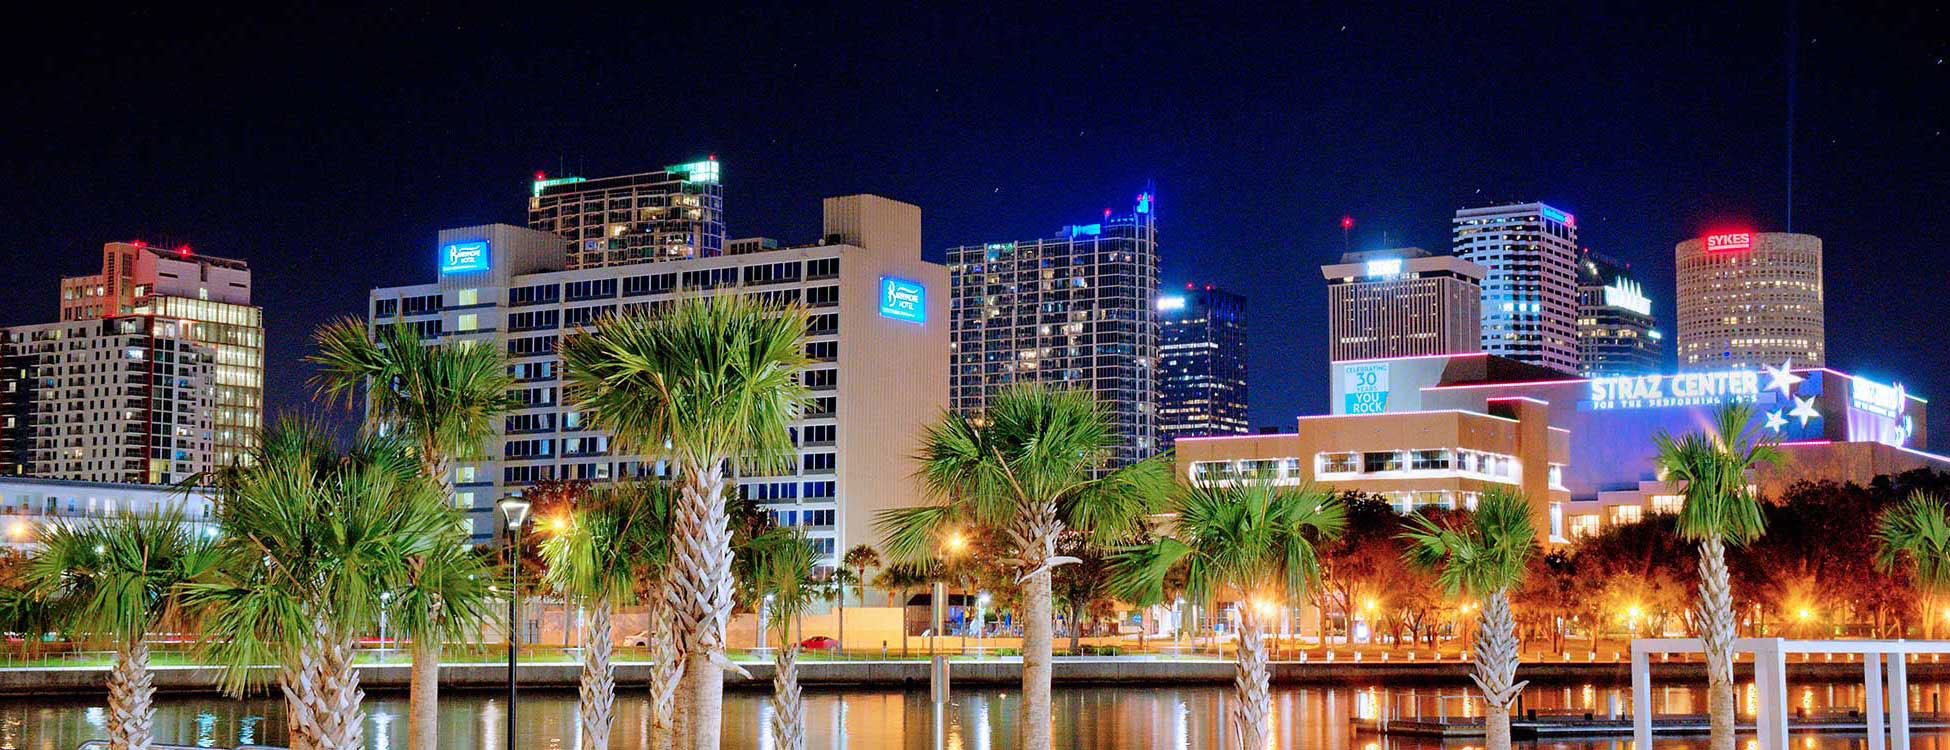 barrymore hotel in downtown tampa night shot